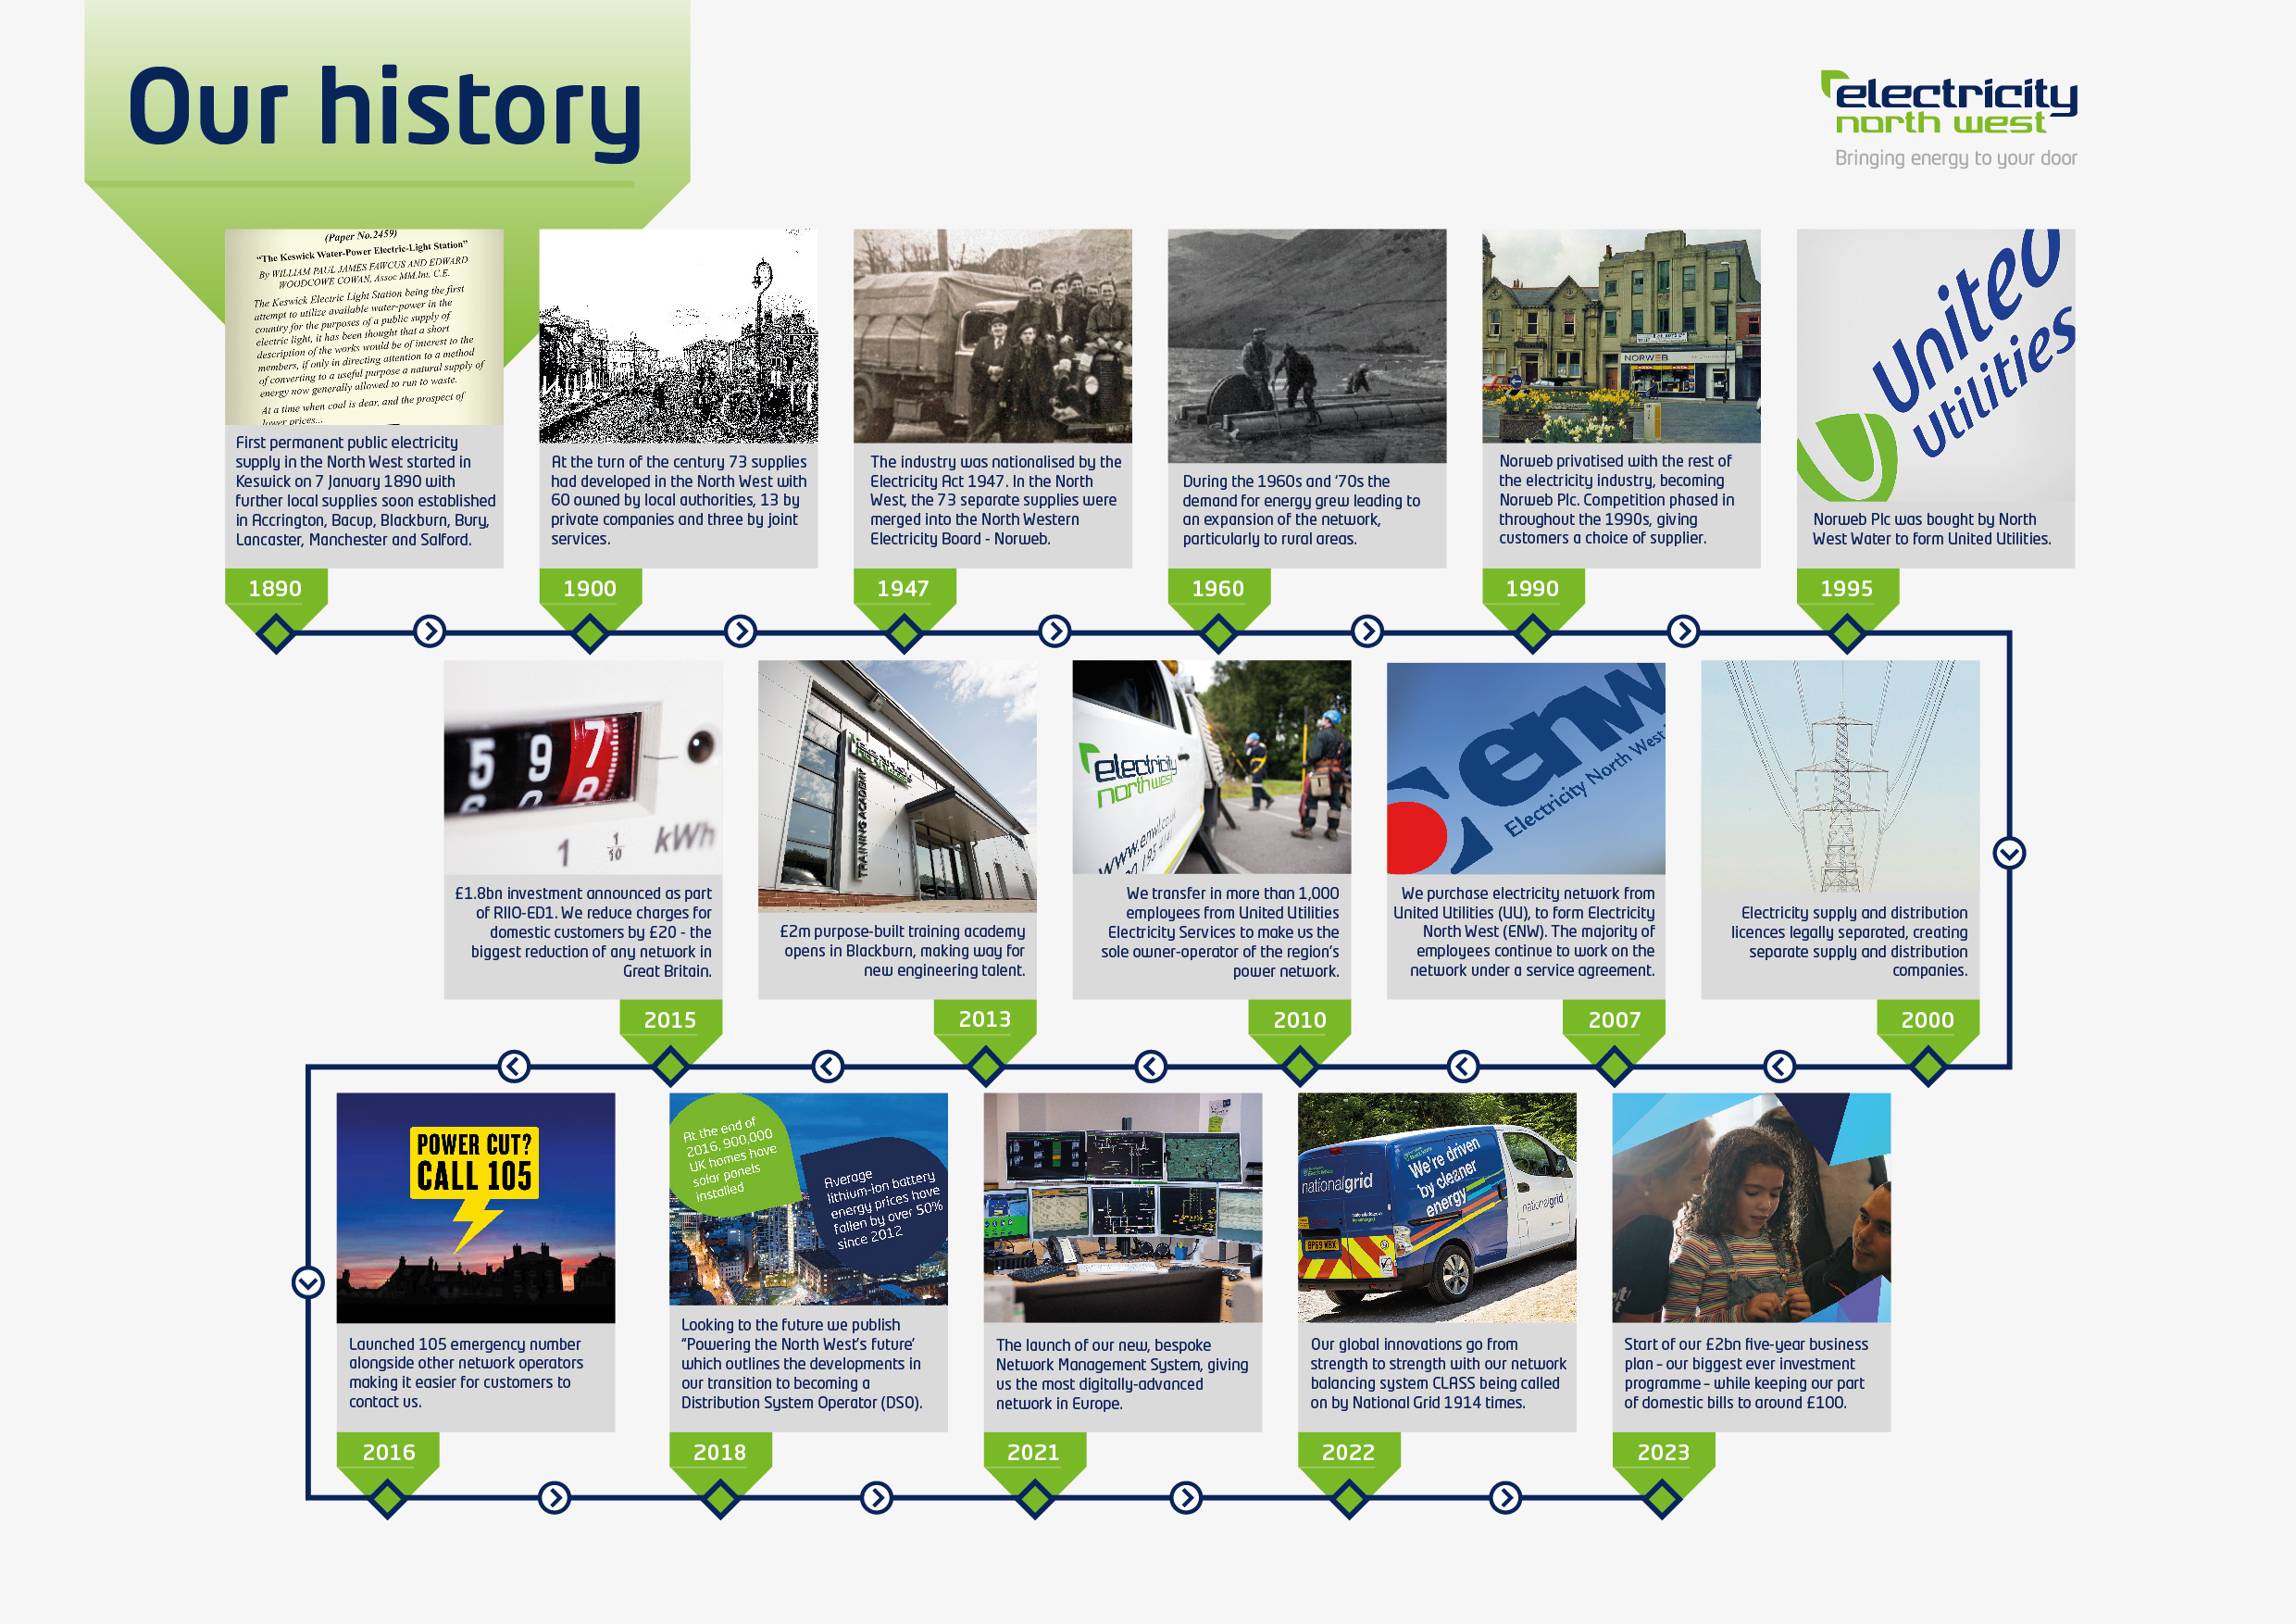 Electricity North West's history timeline